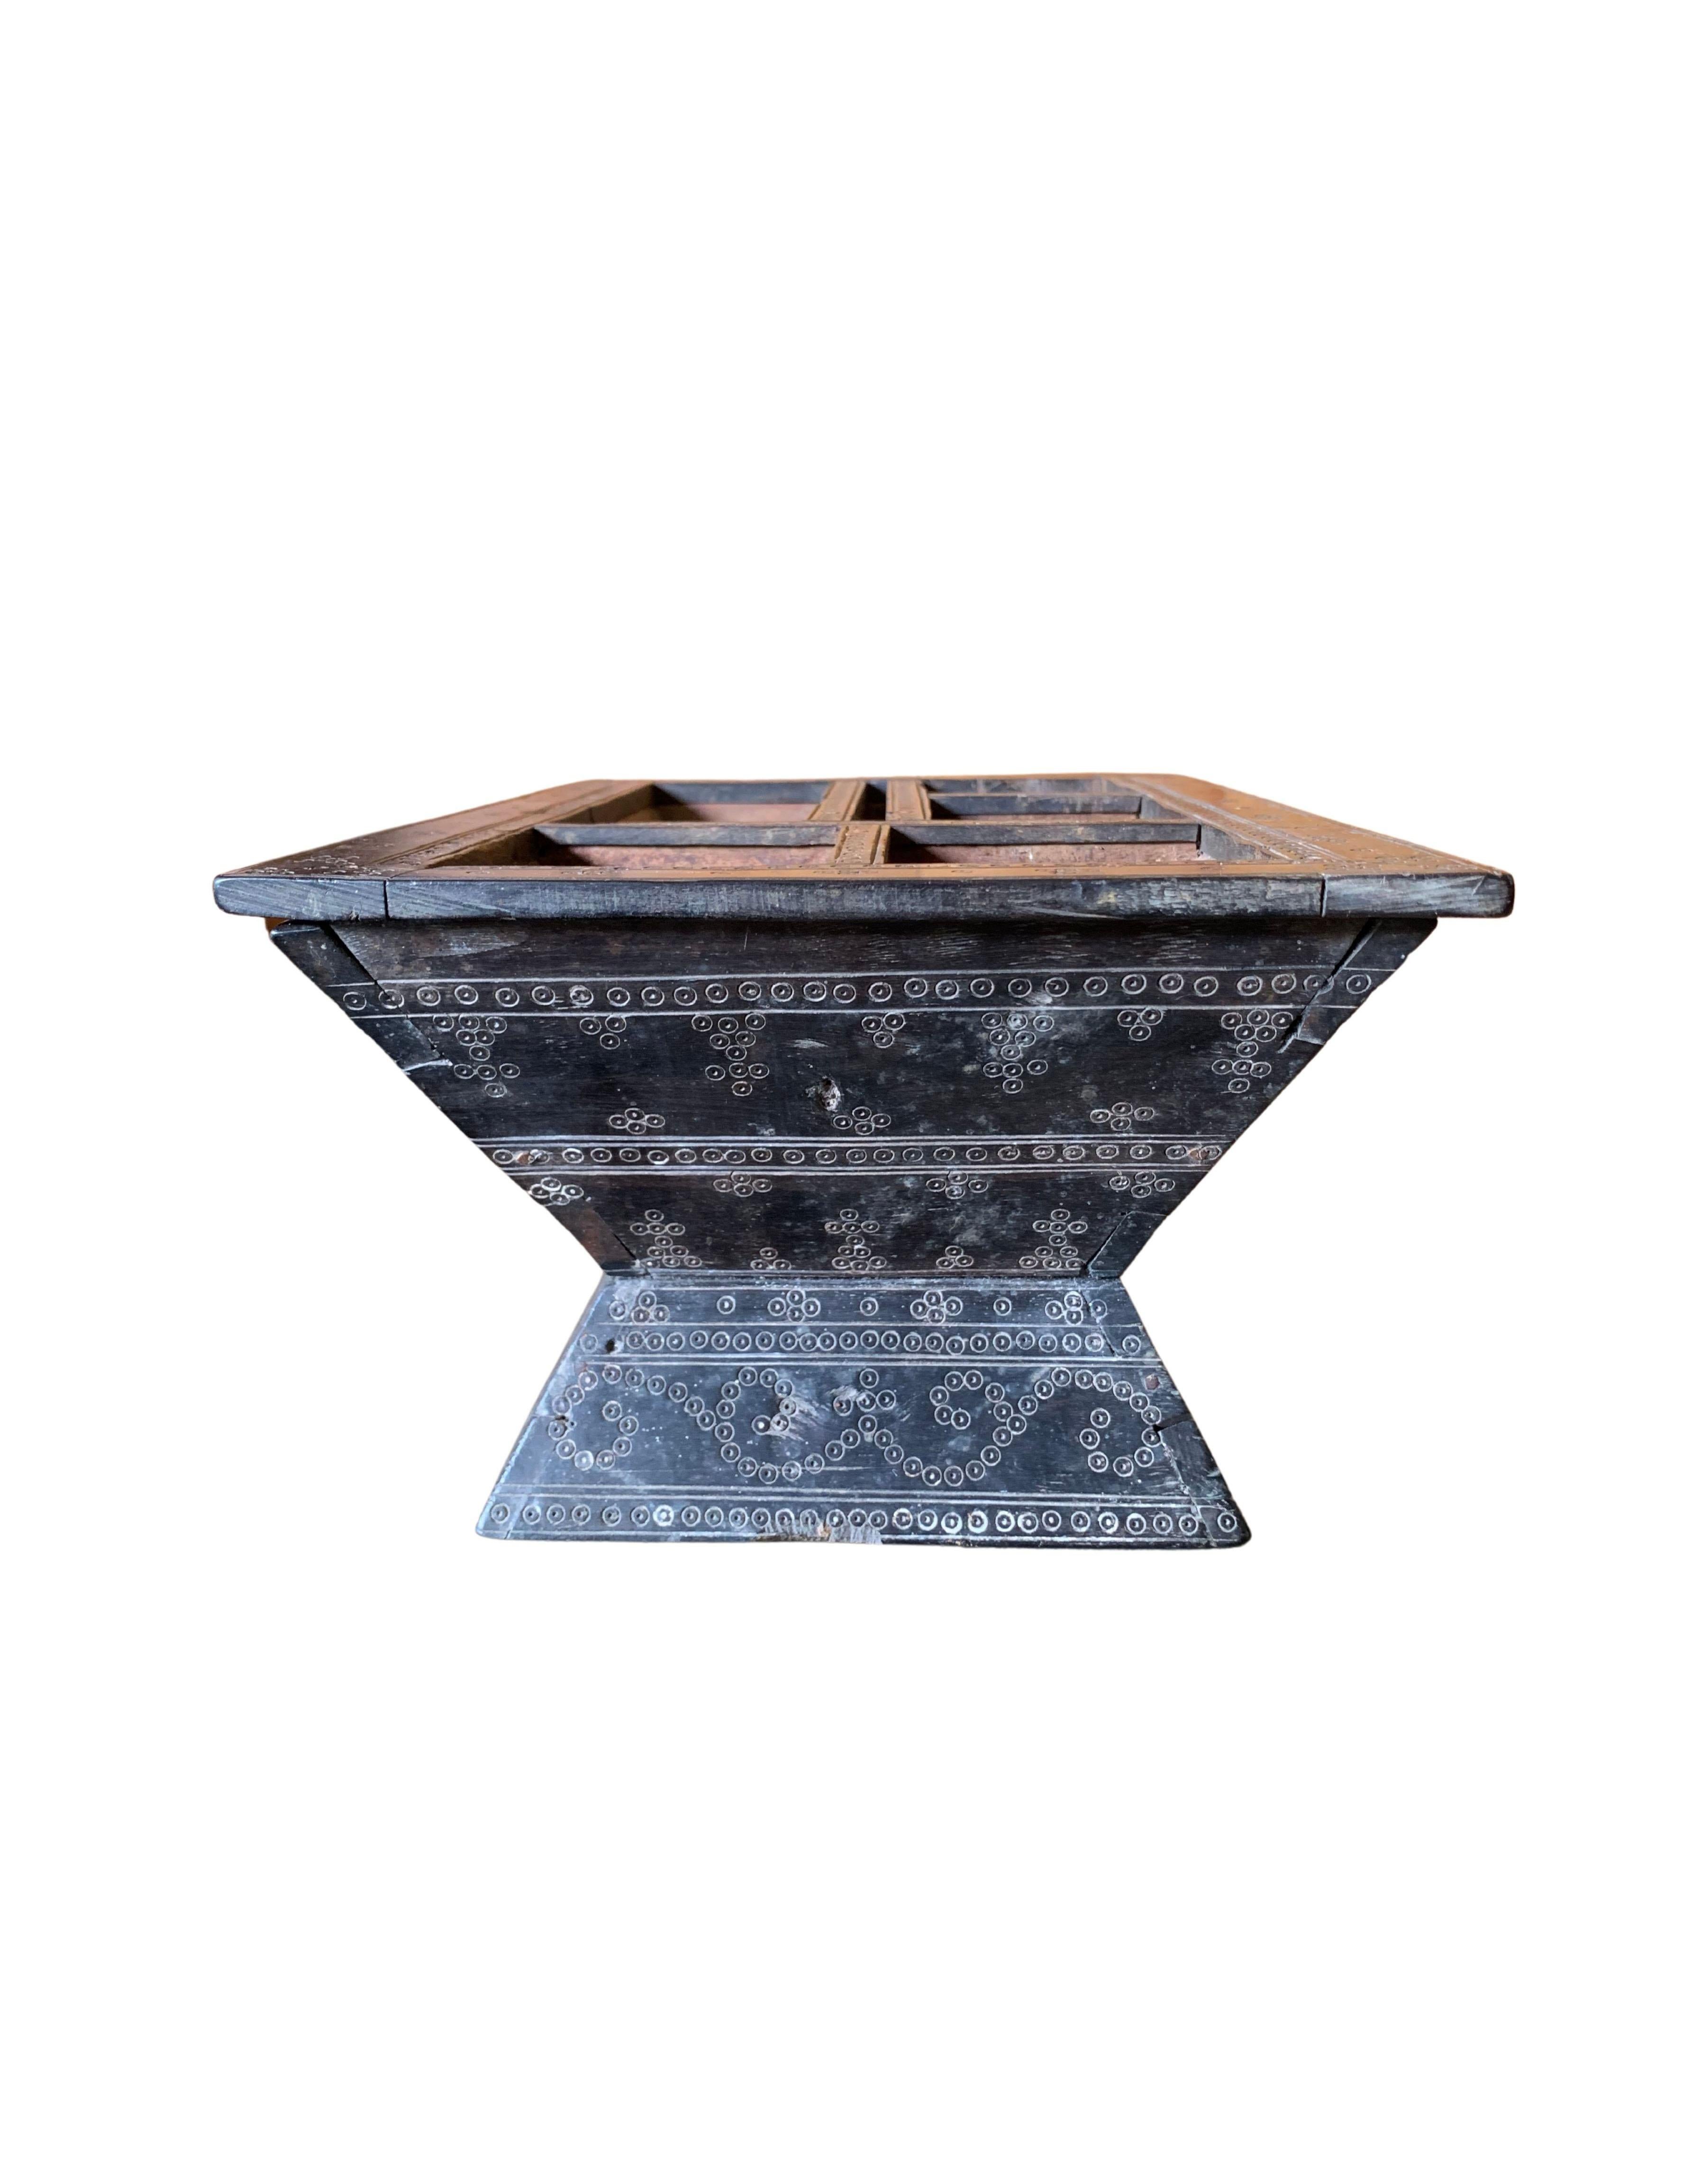 Betel Nut Box from Sumba Island with Tribal Engravings, Indonesia, c. 1950 In Good Condition For Sale In Jimbaran, Bali